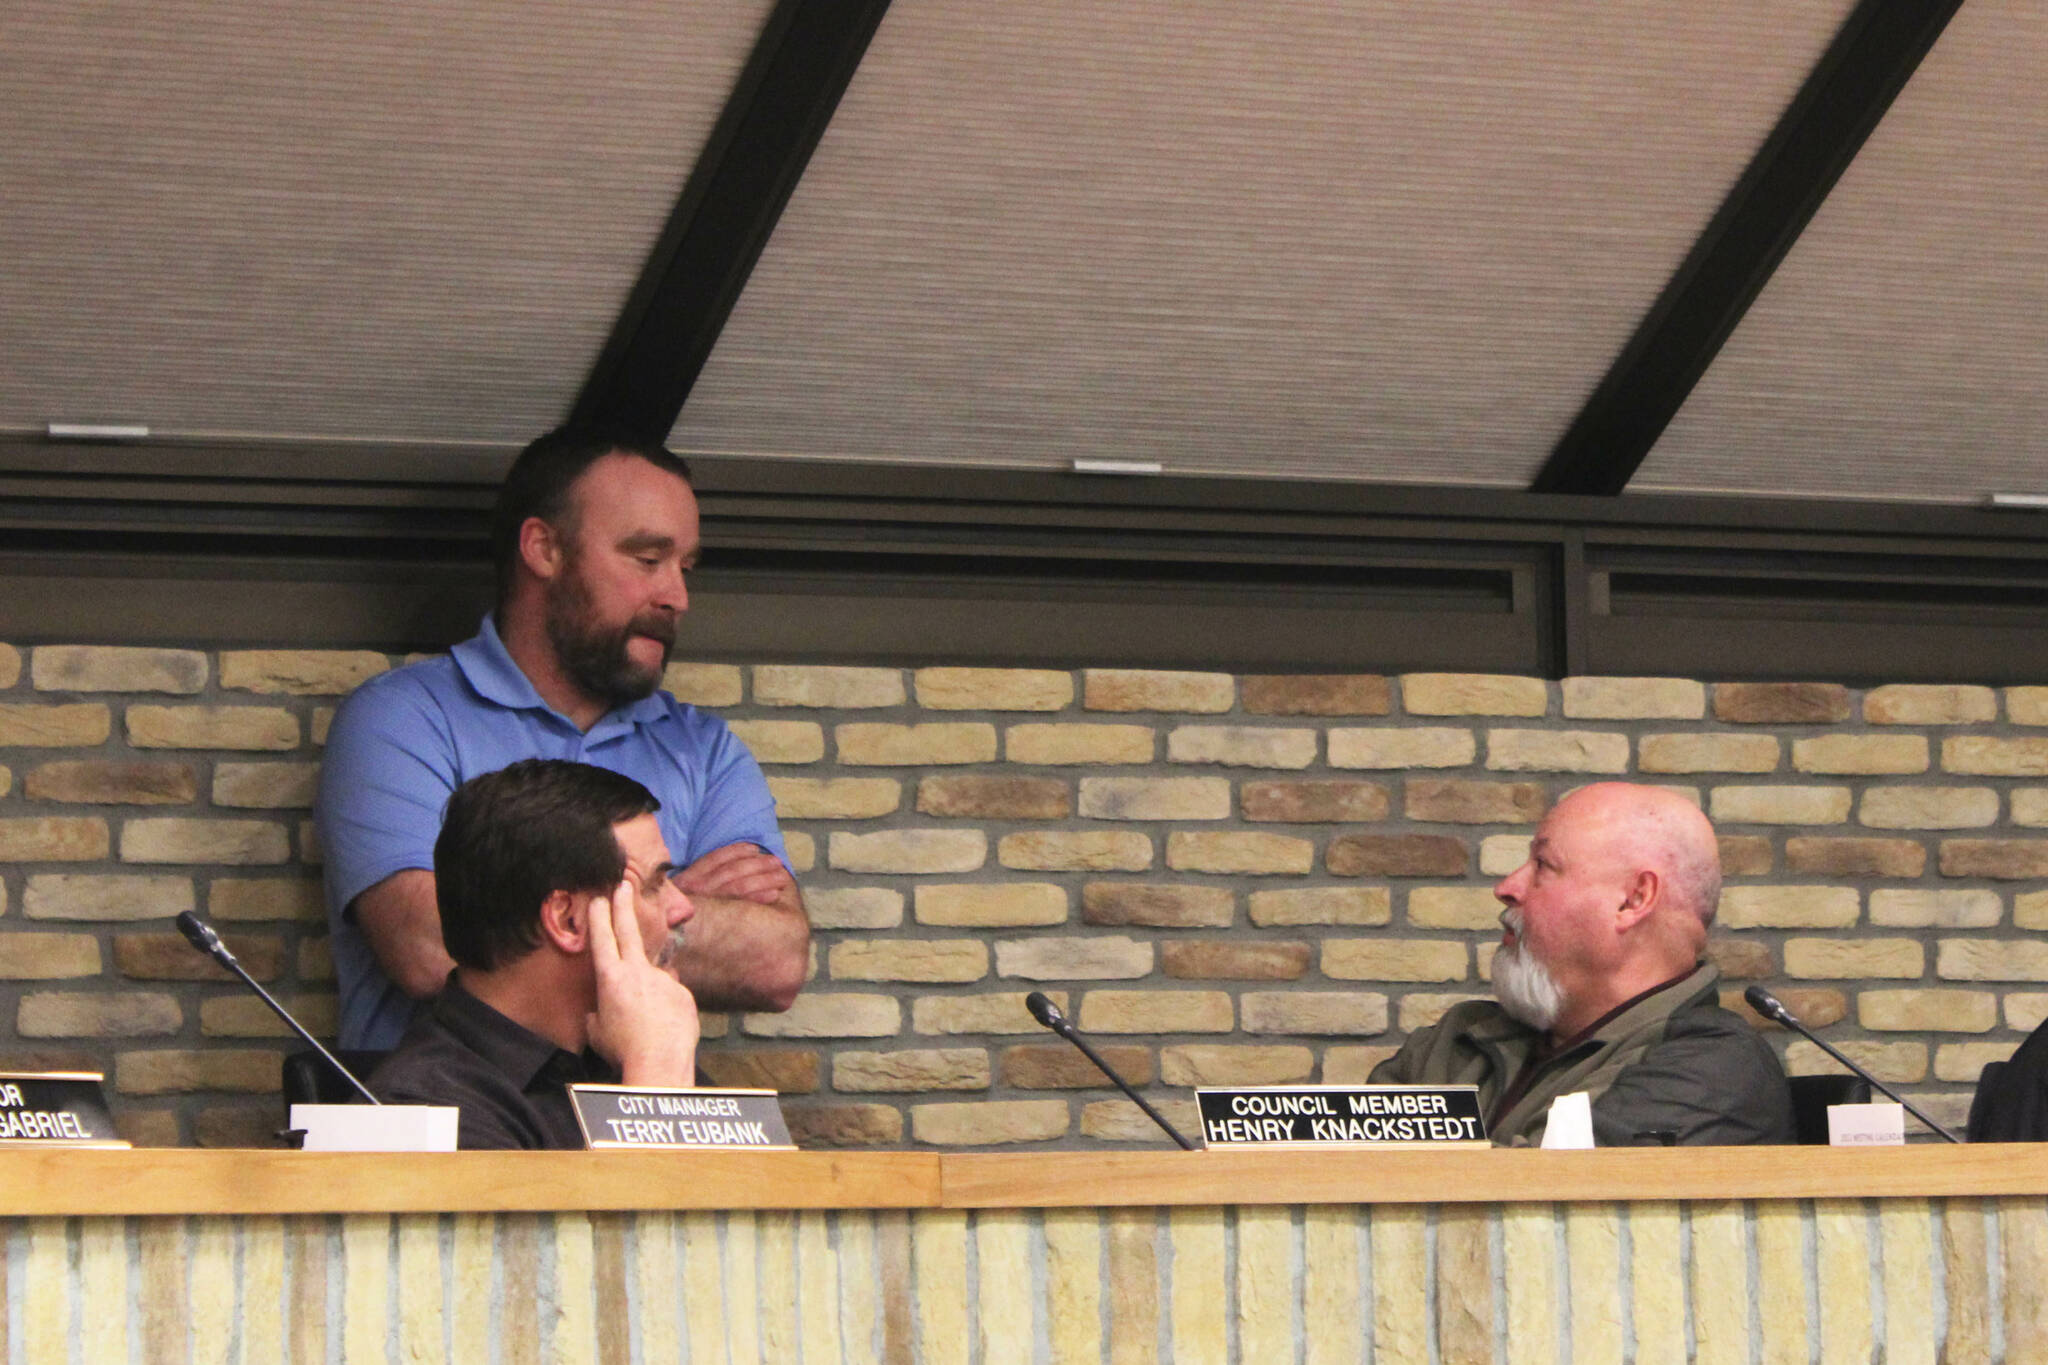 Kenai City Council members Henry Knackstedt (left) and Alex Douthit (standing) speak with Kenai Vice Mayor James Baisden (right) during a council meeting at-ease on Wednesday, Feb. 1, 2023 in Kenai, Alaska. (Ashlyn O’Hara/Peninsula Clarion)